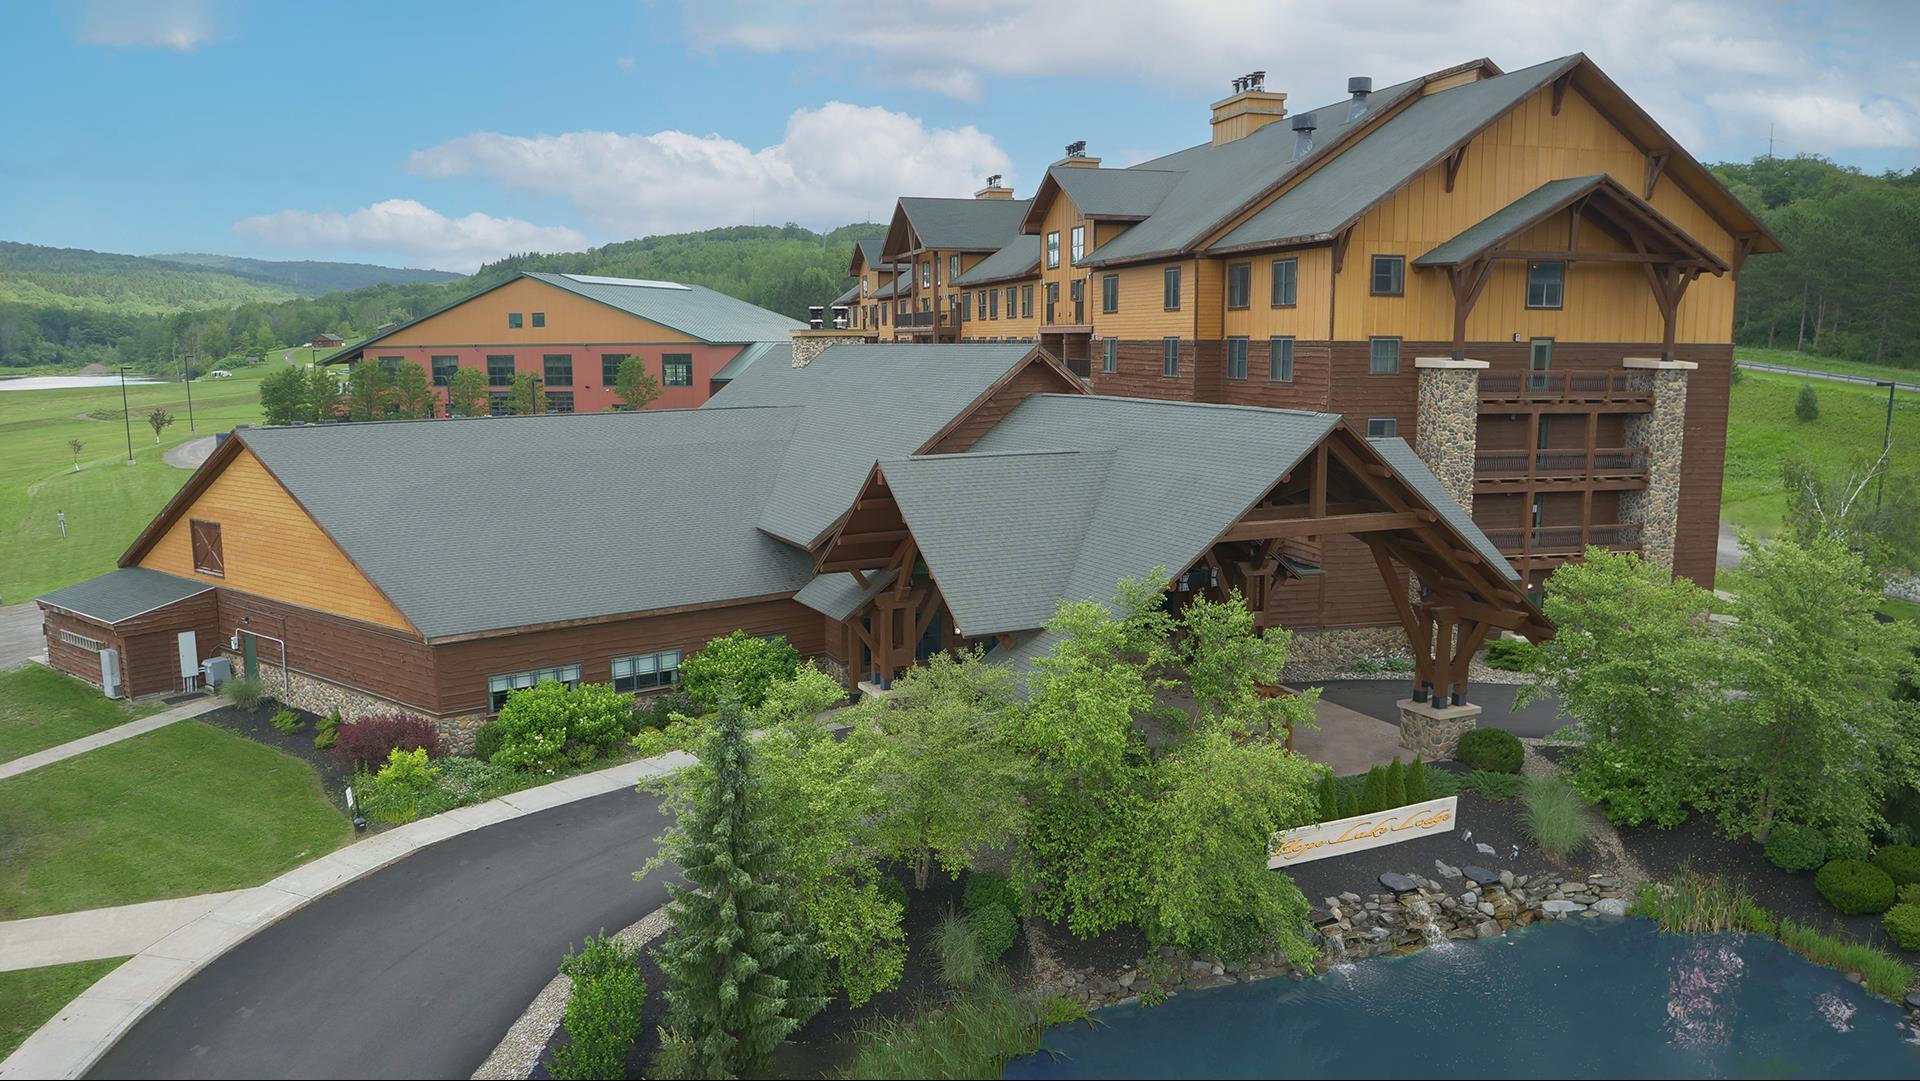 Greek Peak Mountain Resort - Hope Lake Lodge and Conference Center in Cortland, NY